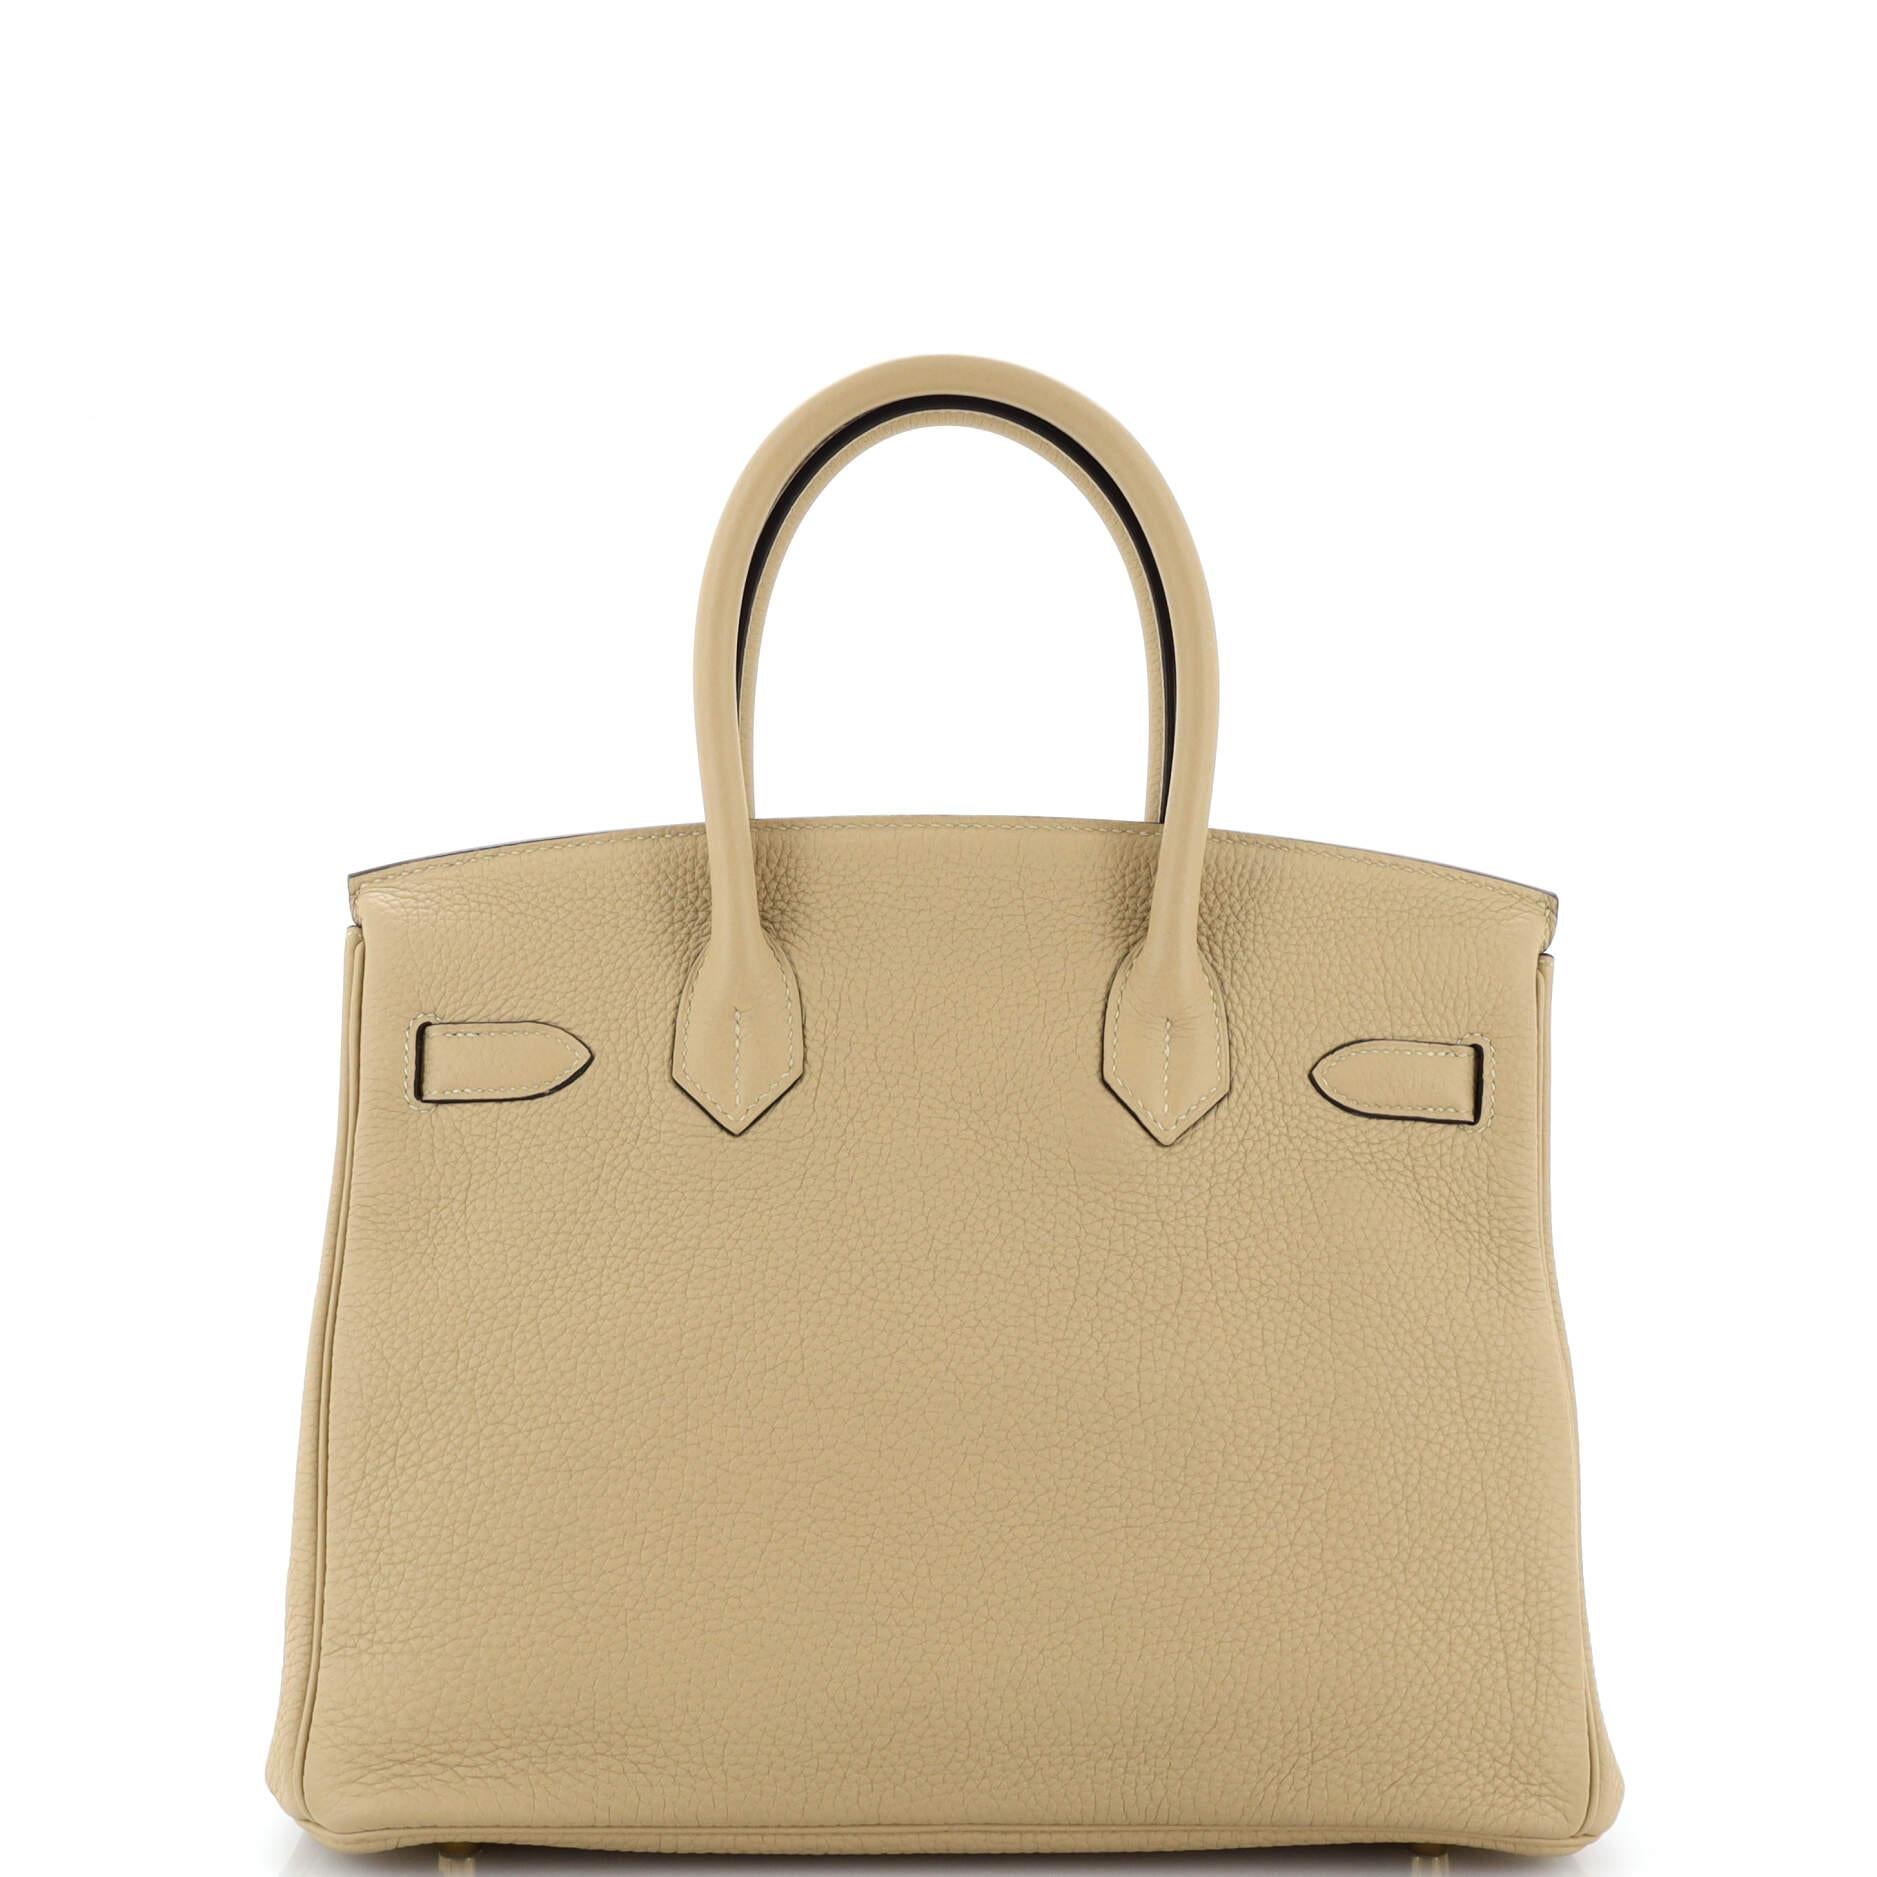 Hermes Birkin Handbag Light Togo with Gold Hardware 30 In Good Condition For Sale In NY, NY